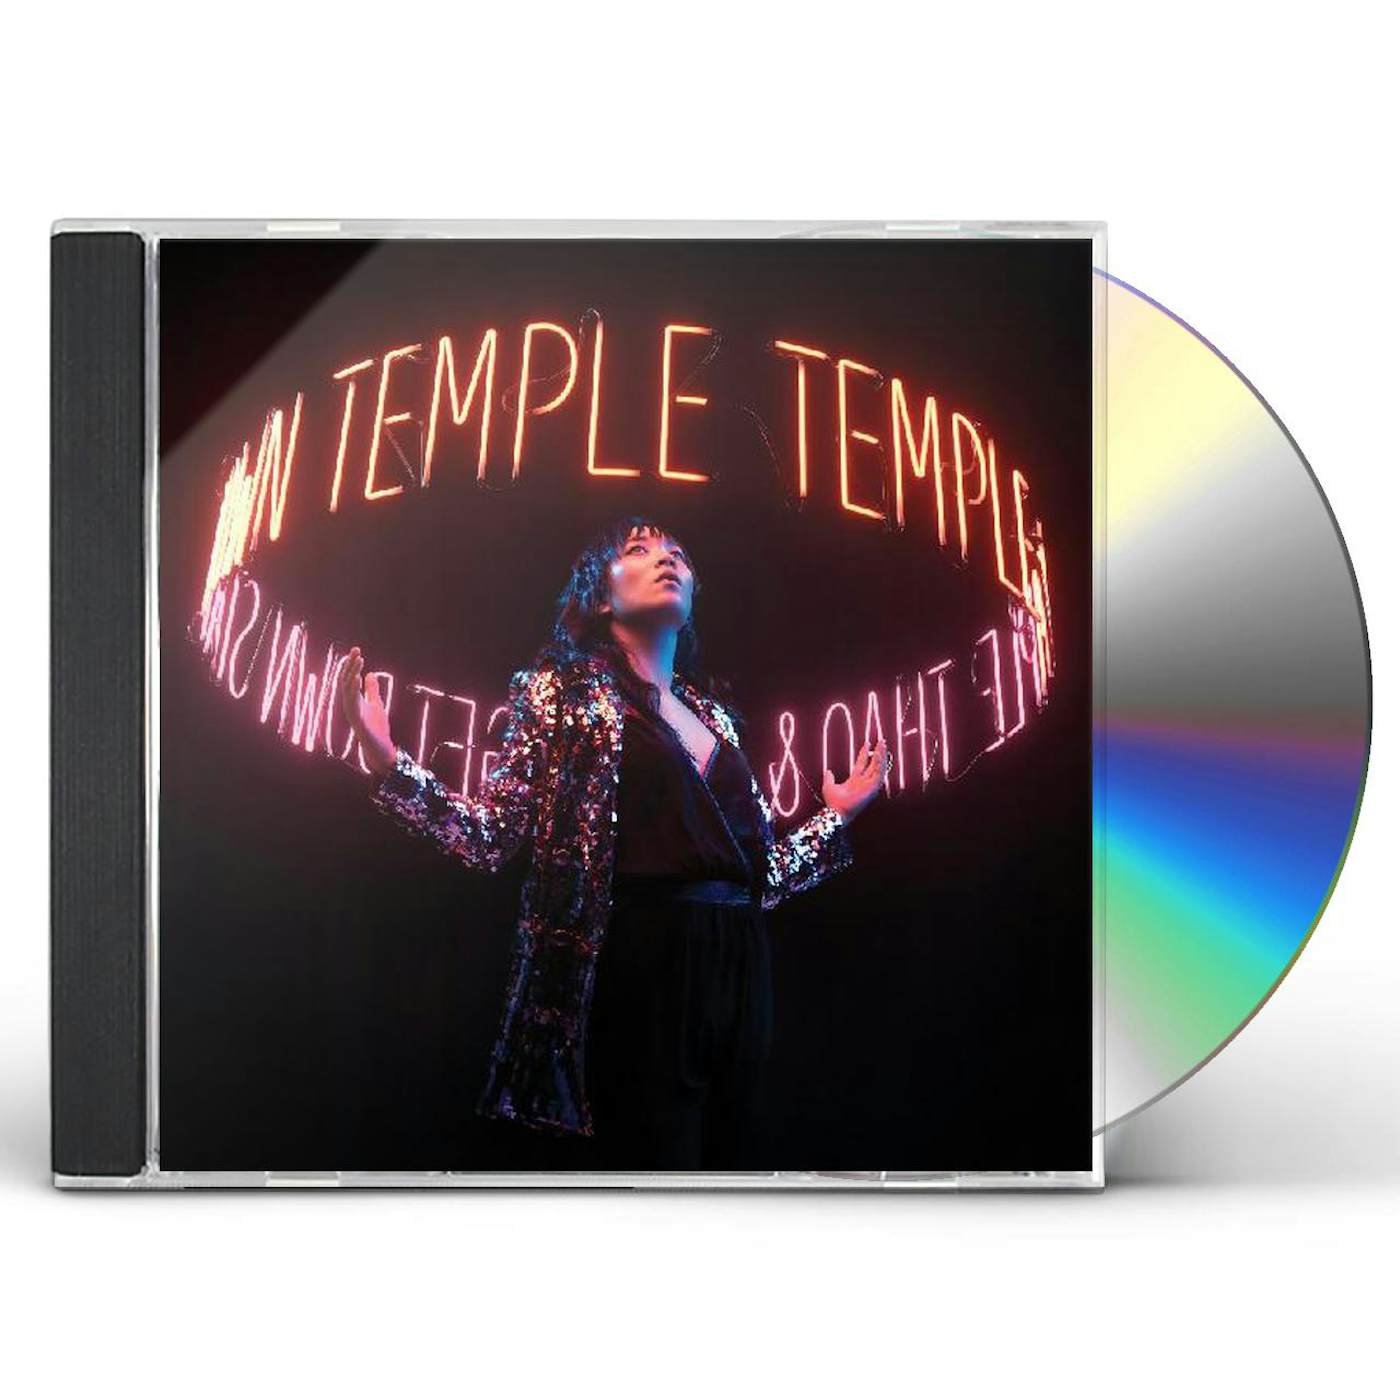 Thao & The Get Down Stay Down TEMPLE CD